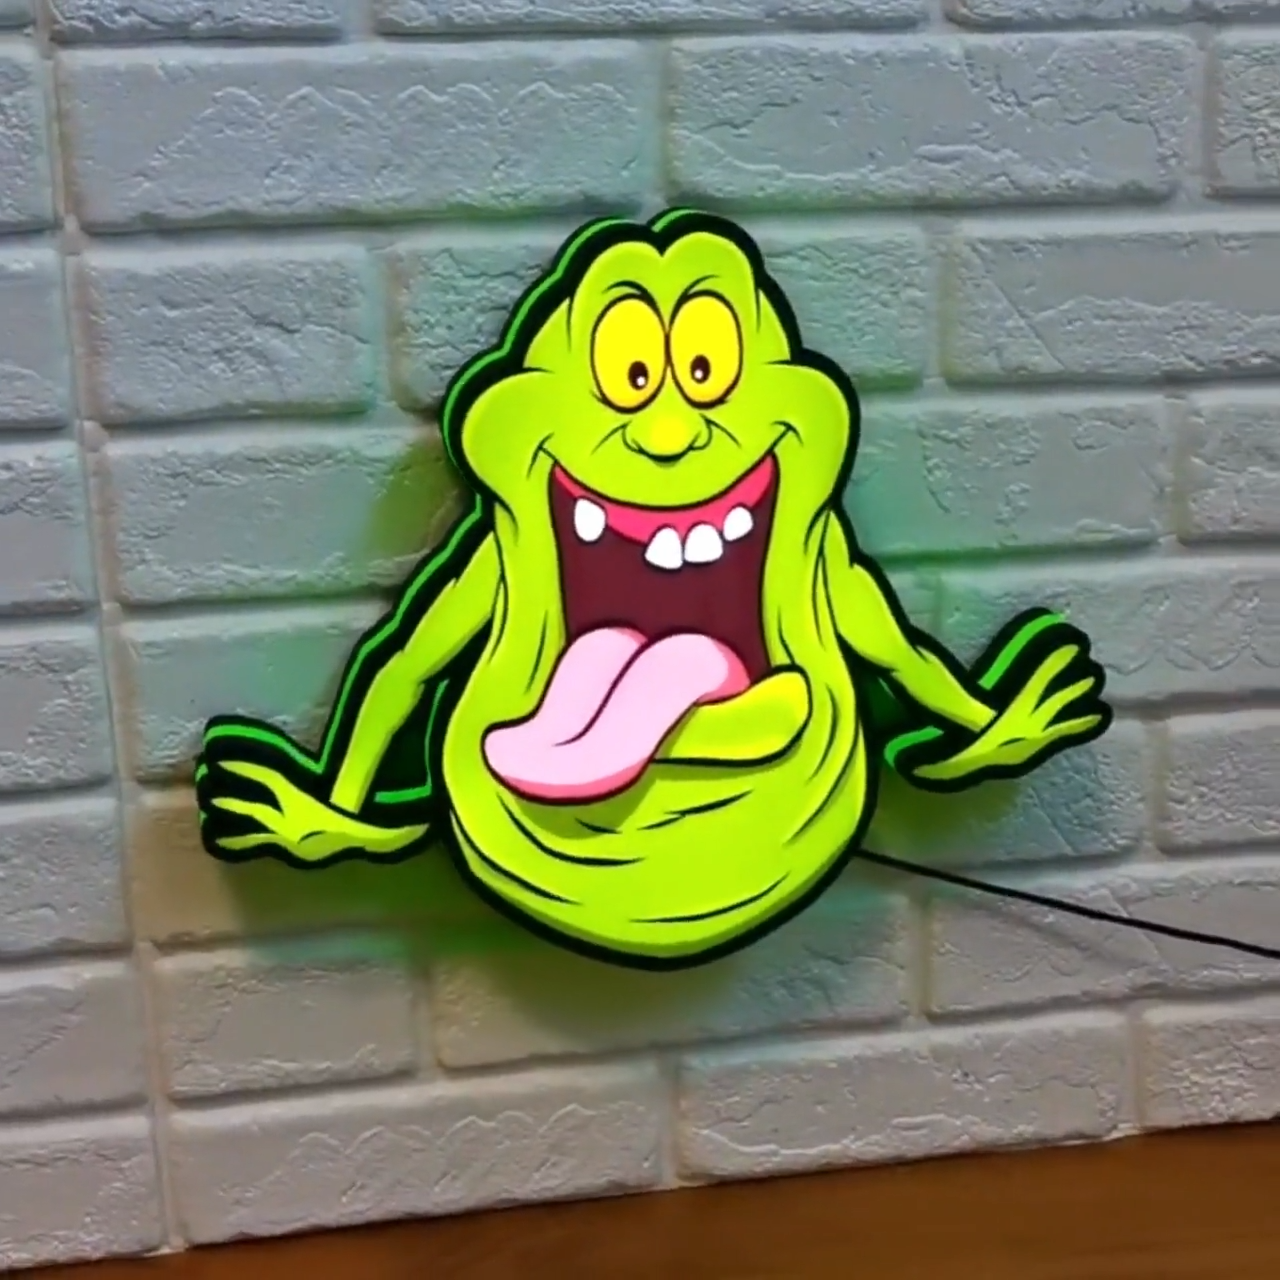 Slimer Ghostbusters Lightbox | USB Powered with Dimming Control | Perfect Decor